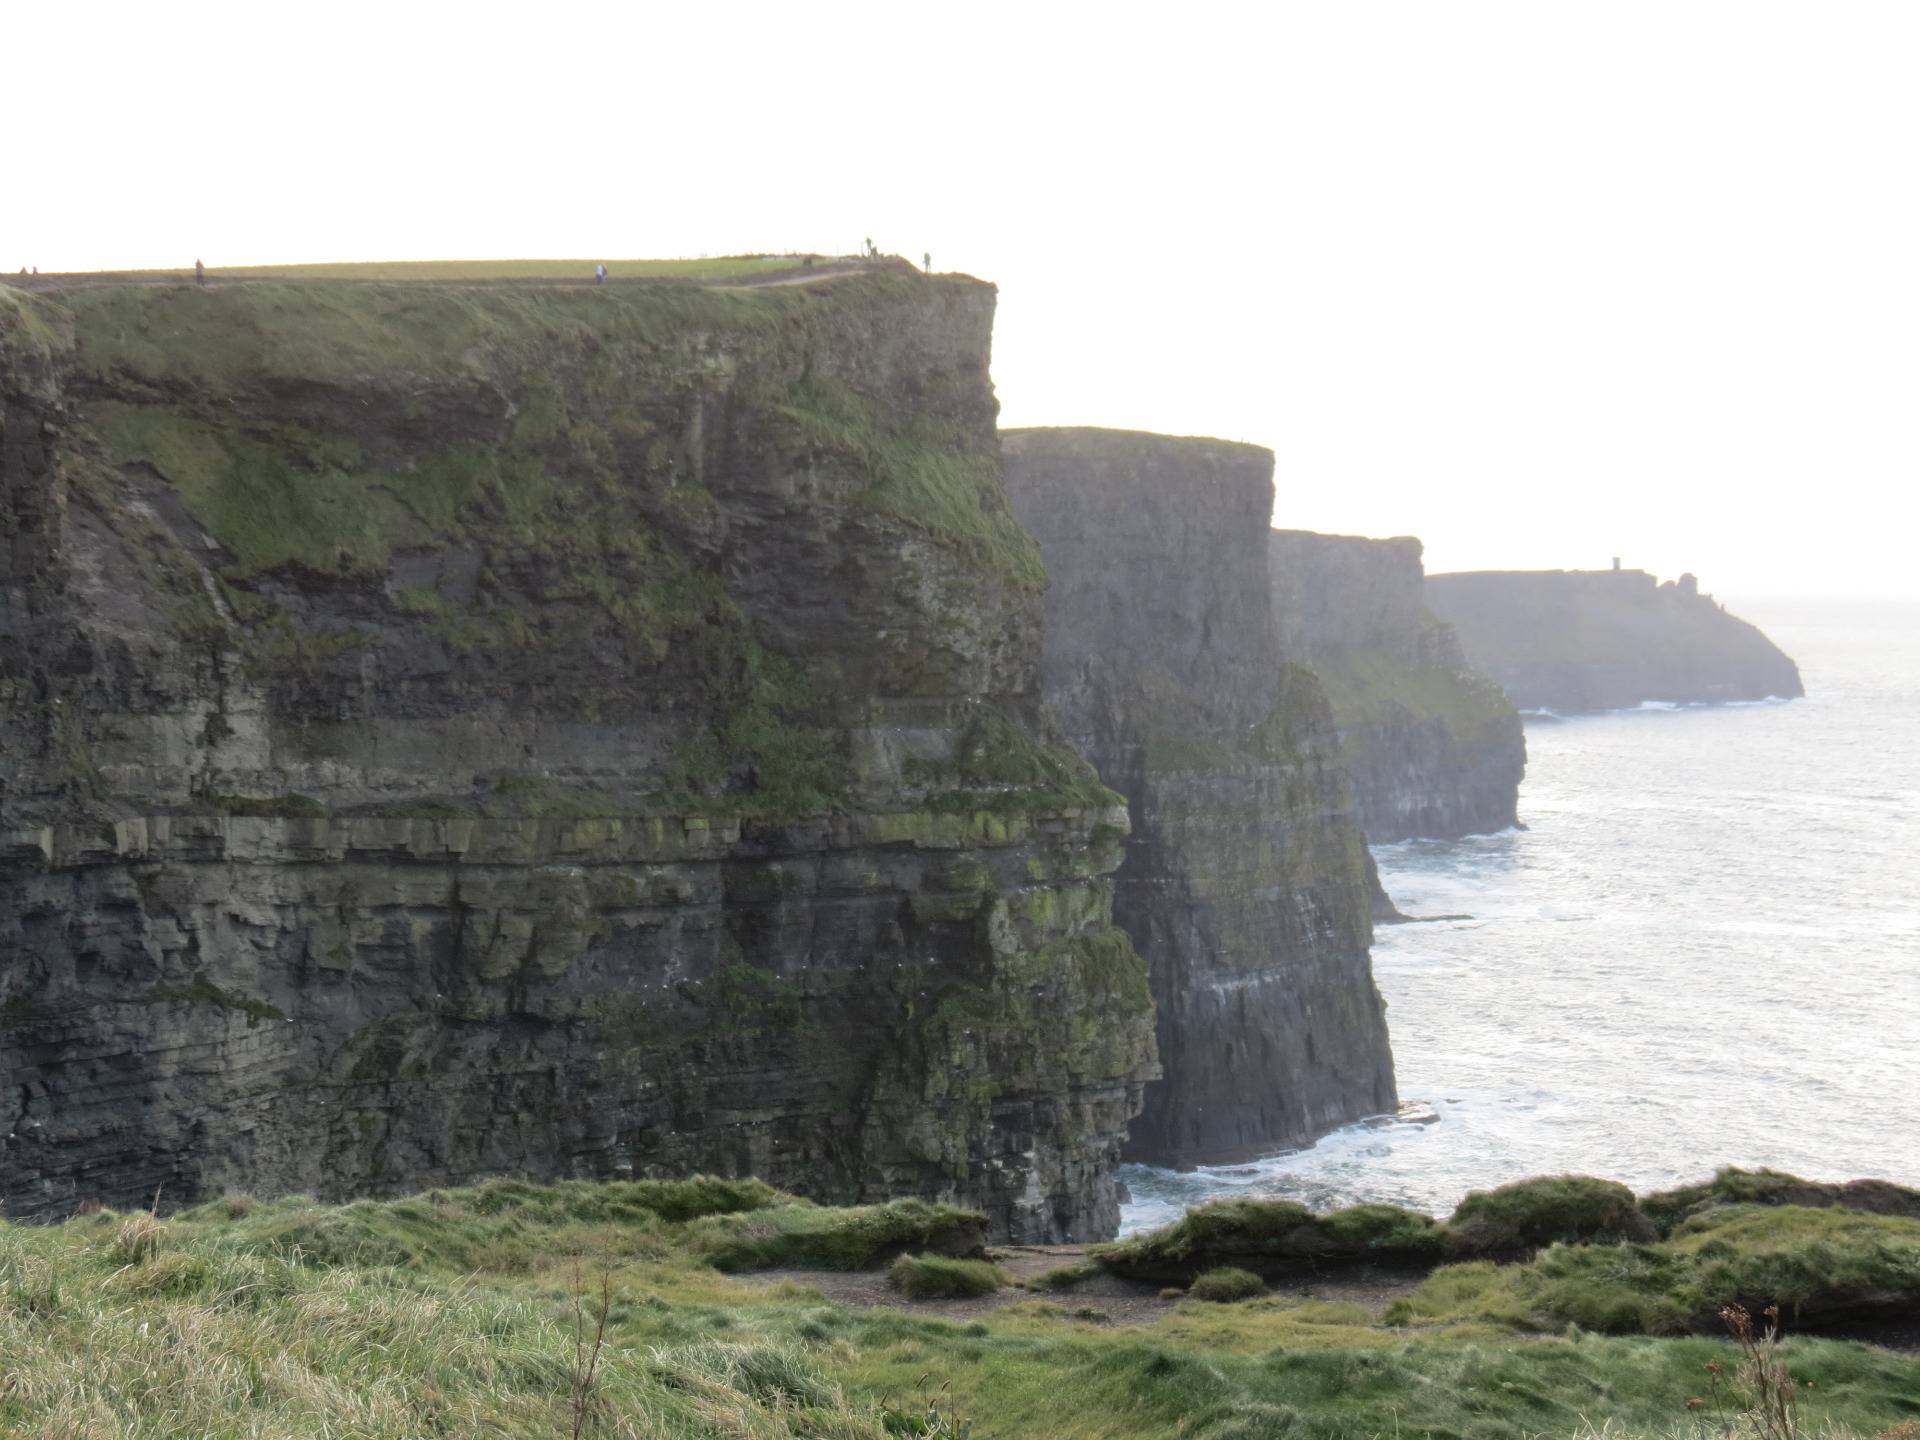 Cliffs of Moher, see one of the most impressive cliffs in the world